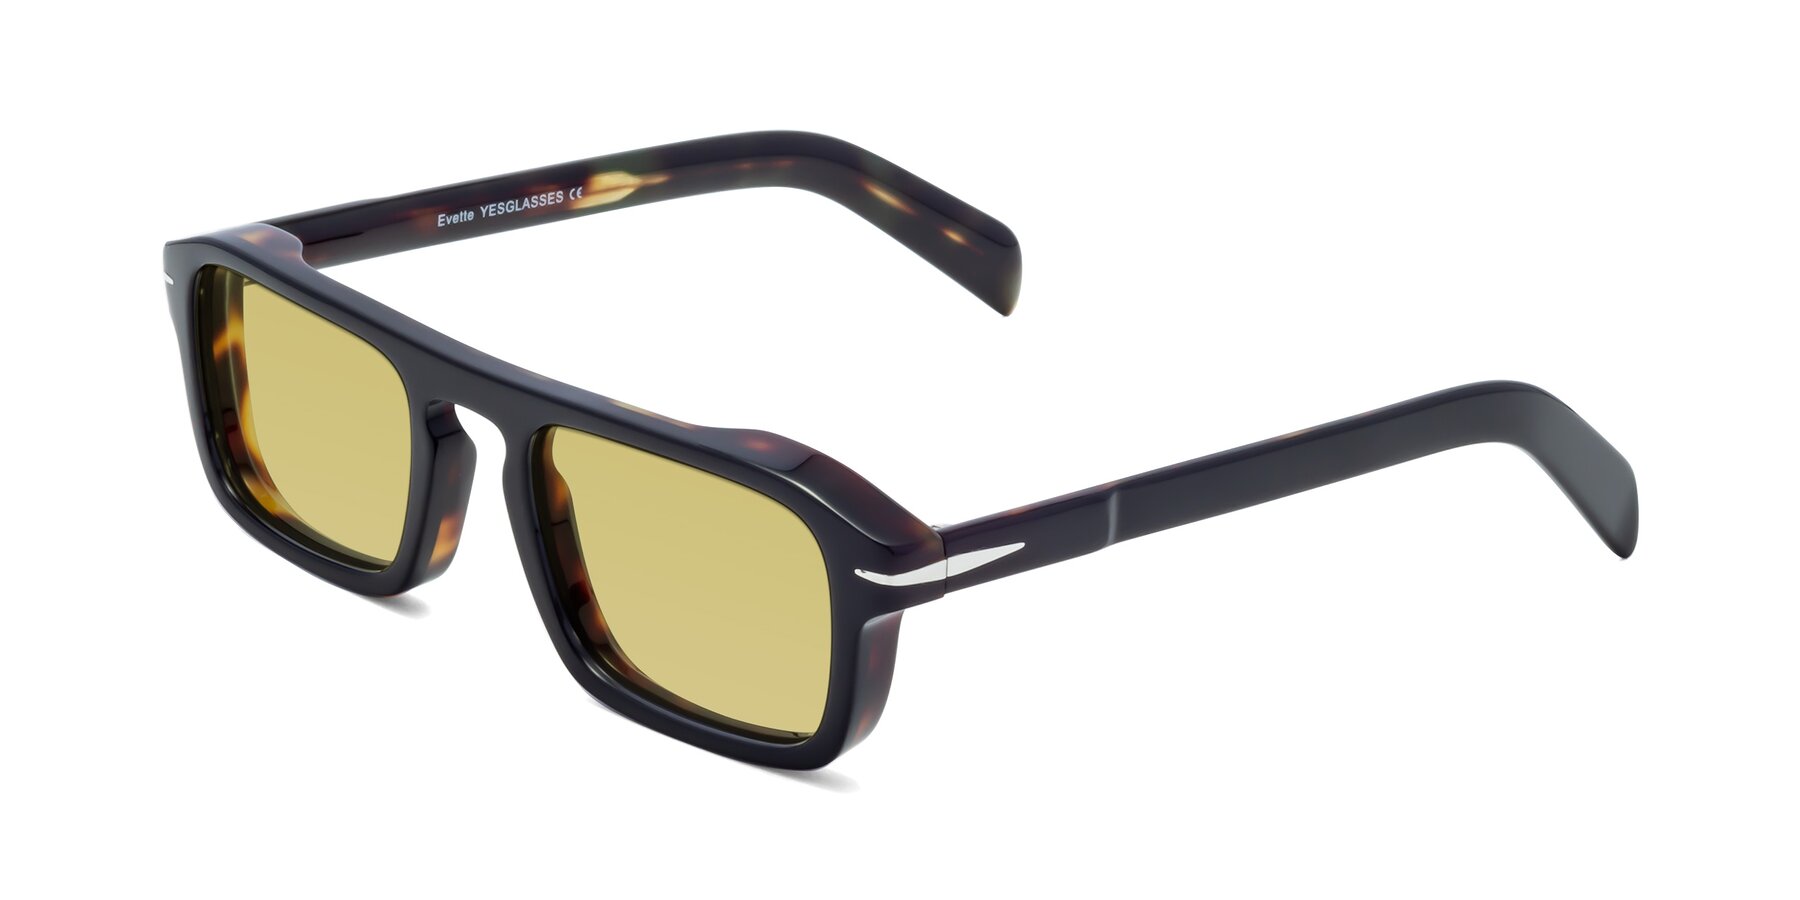 Angle of Evette in Black-Tortoise with Medium Champagne Tinted Lenses